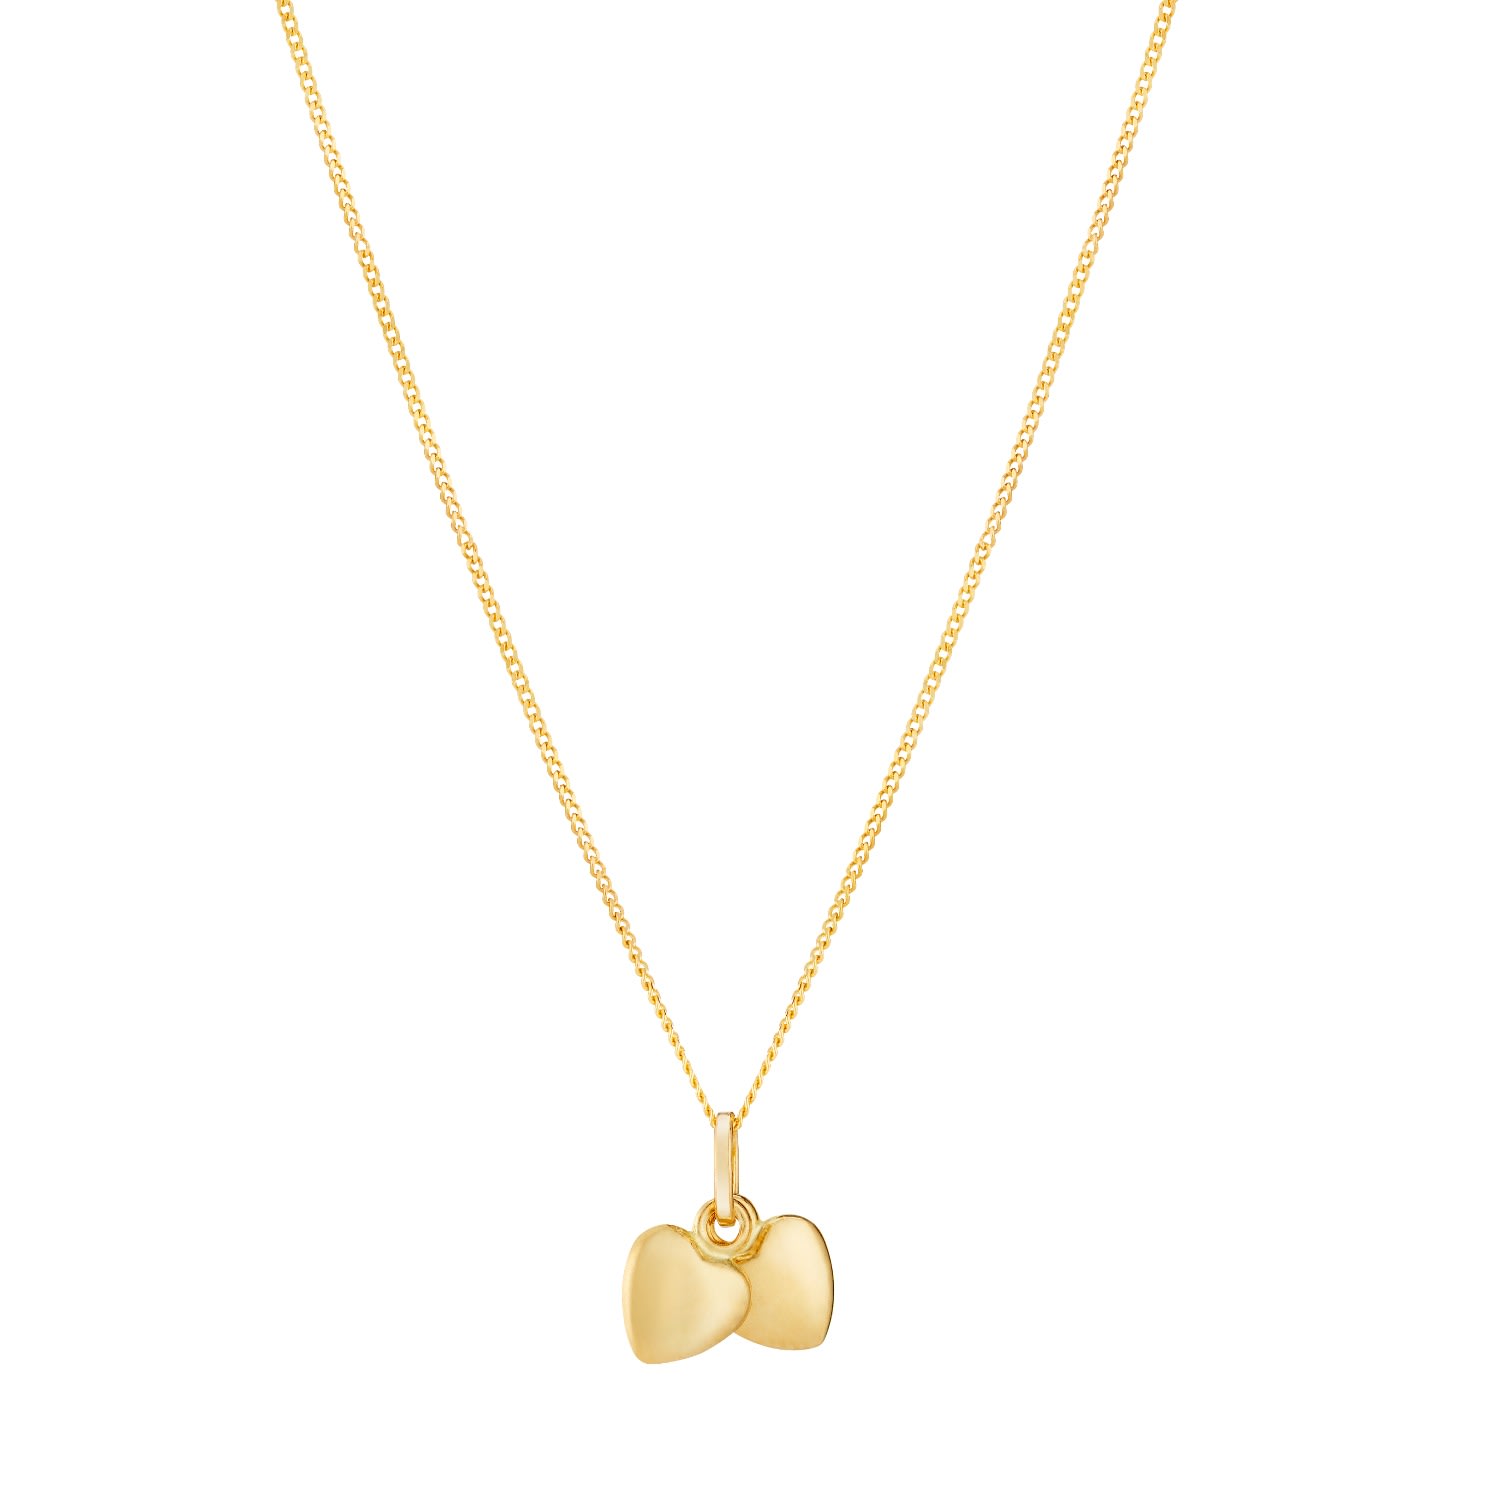 Women’s Gold Double Heart Charm Necklace Posh Totty Designs